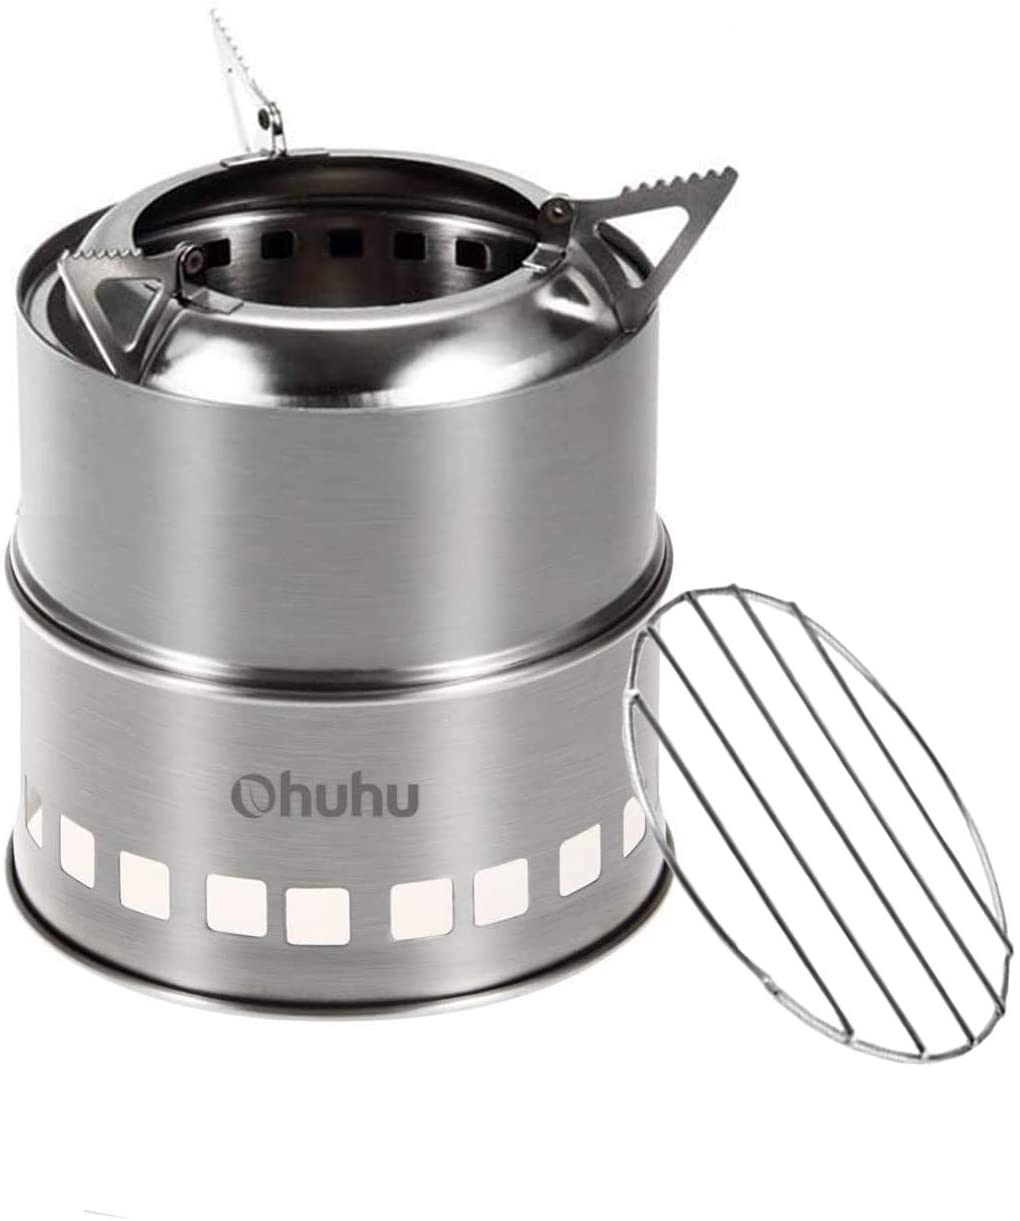 Review of Ohuhu Stainless Steel Camping Stove